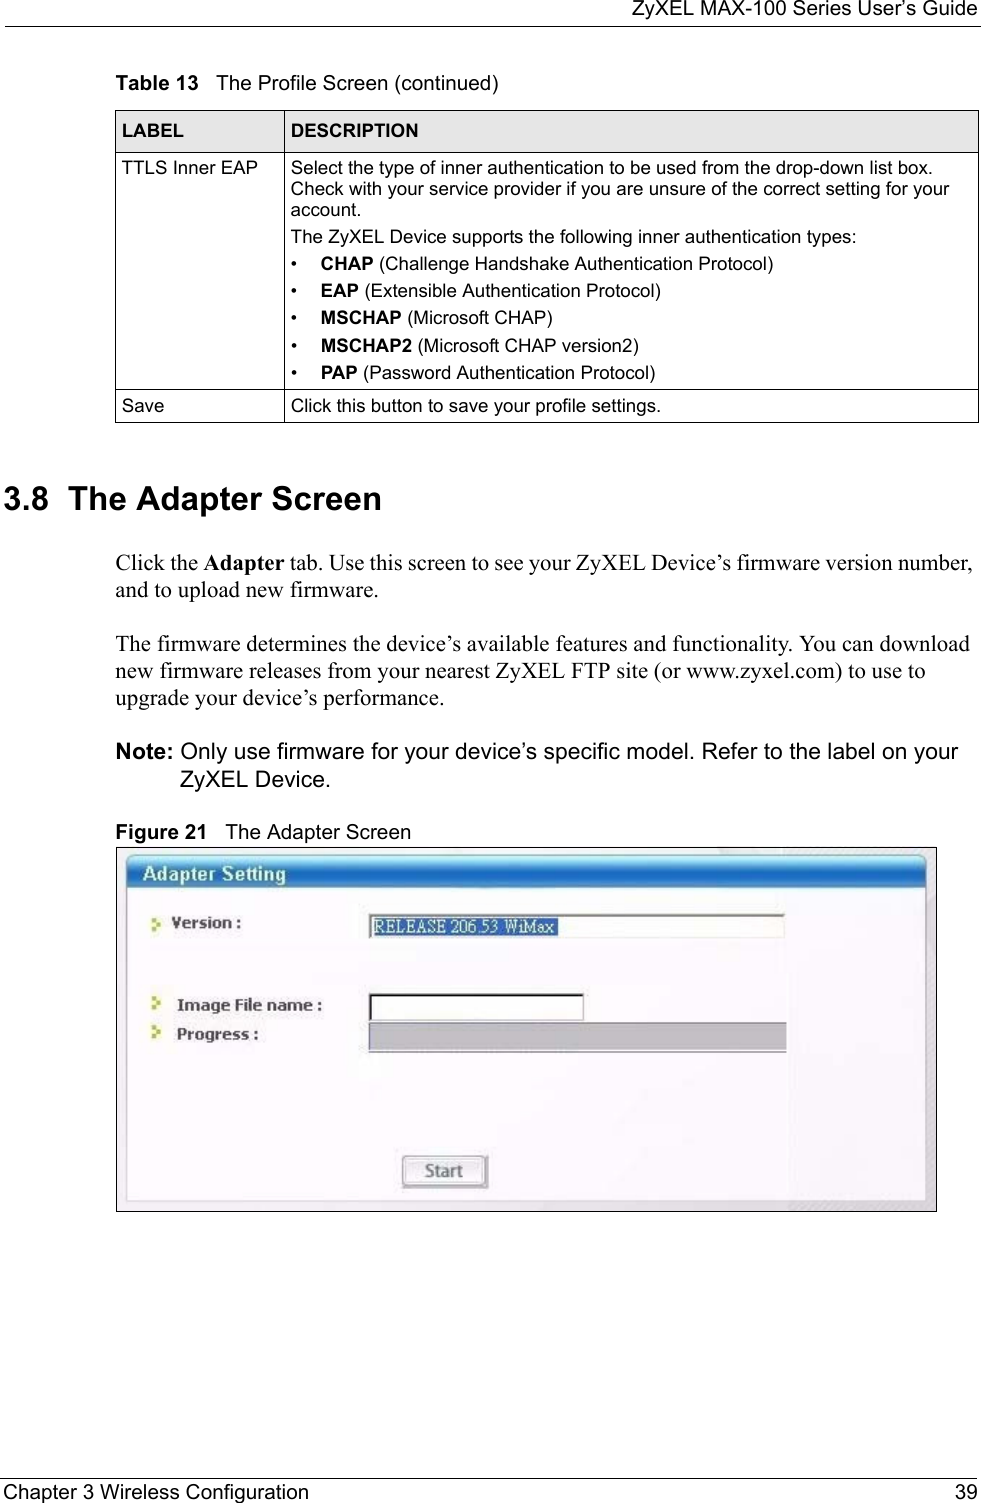 ZyXEL MAX-100 Series User’s GuideChapter 3 Wireless Configuration 393.8  The Adapter Screen Click the Adapter tab. Use this screen to see your ZyXEL Device’s firmware version number, and to upload new firmware.The firmware determines the device’s available features and functionality. You can download new firmware releases from your nearest ZyXEL FTP site (or www.zyxel.com) to use to upgrade your device’s performance.Note: Only use firmware for your device’s specific model. Refer to the label on your ZyXEL Device. Figure 21   The Adapter ScreenTTLS Inner EAP Select the type of inner authentication to be used from the drop-down list box. Check with your service provider if you are unsure of the correct setting for your account.The ZyXEL Device supports the following inner authentication types:•CHAP (Challenge Handshake Authentication Protocol)•EAP (Extensible Authentication Protocol)•MSCHAP (Microsoft CHAP)•MSCHAP2 (Microsoft CHAP version2)•PAP (Password Authentication Protocol)Save Click this button to save your profile settings.Table 13   The Profile Screen (continued)LABEL DESCRIPTION